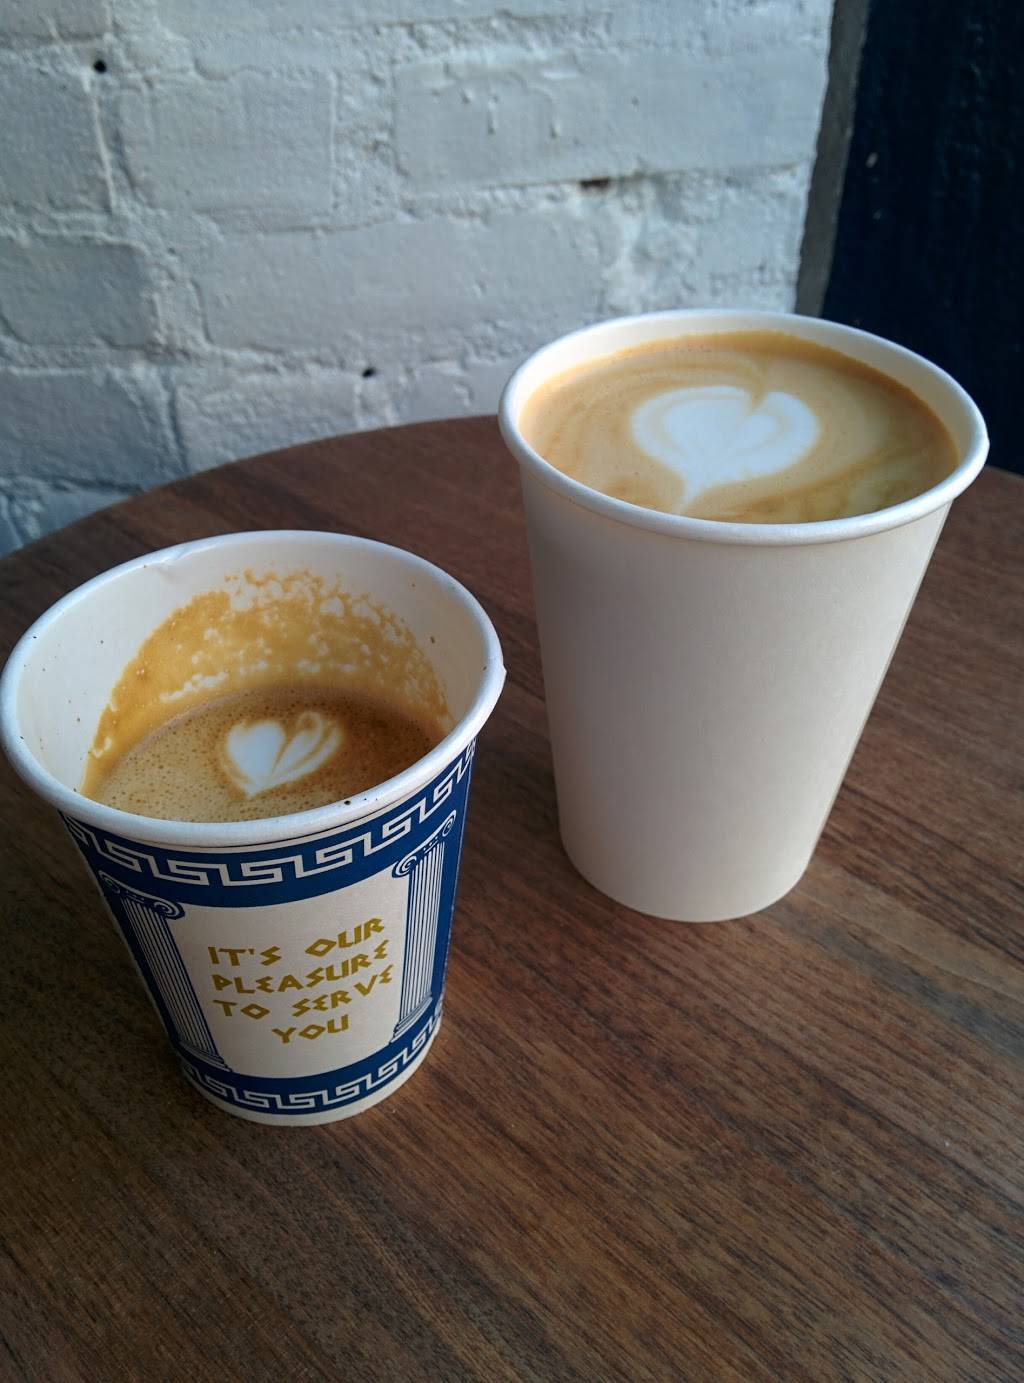 Northerly Coffee | cafe | 181 Havemeyer St, Brooklyn, NY 11211, USA | 7183881101 OR +1 718-388-1101